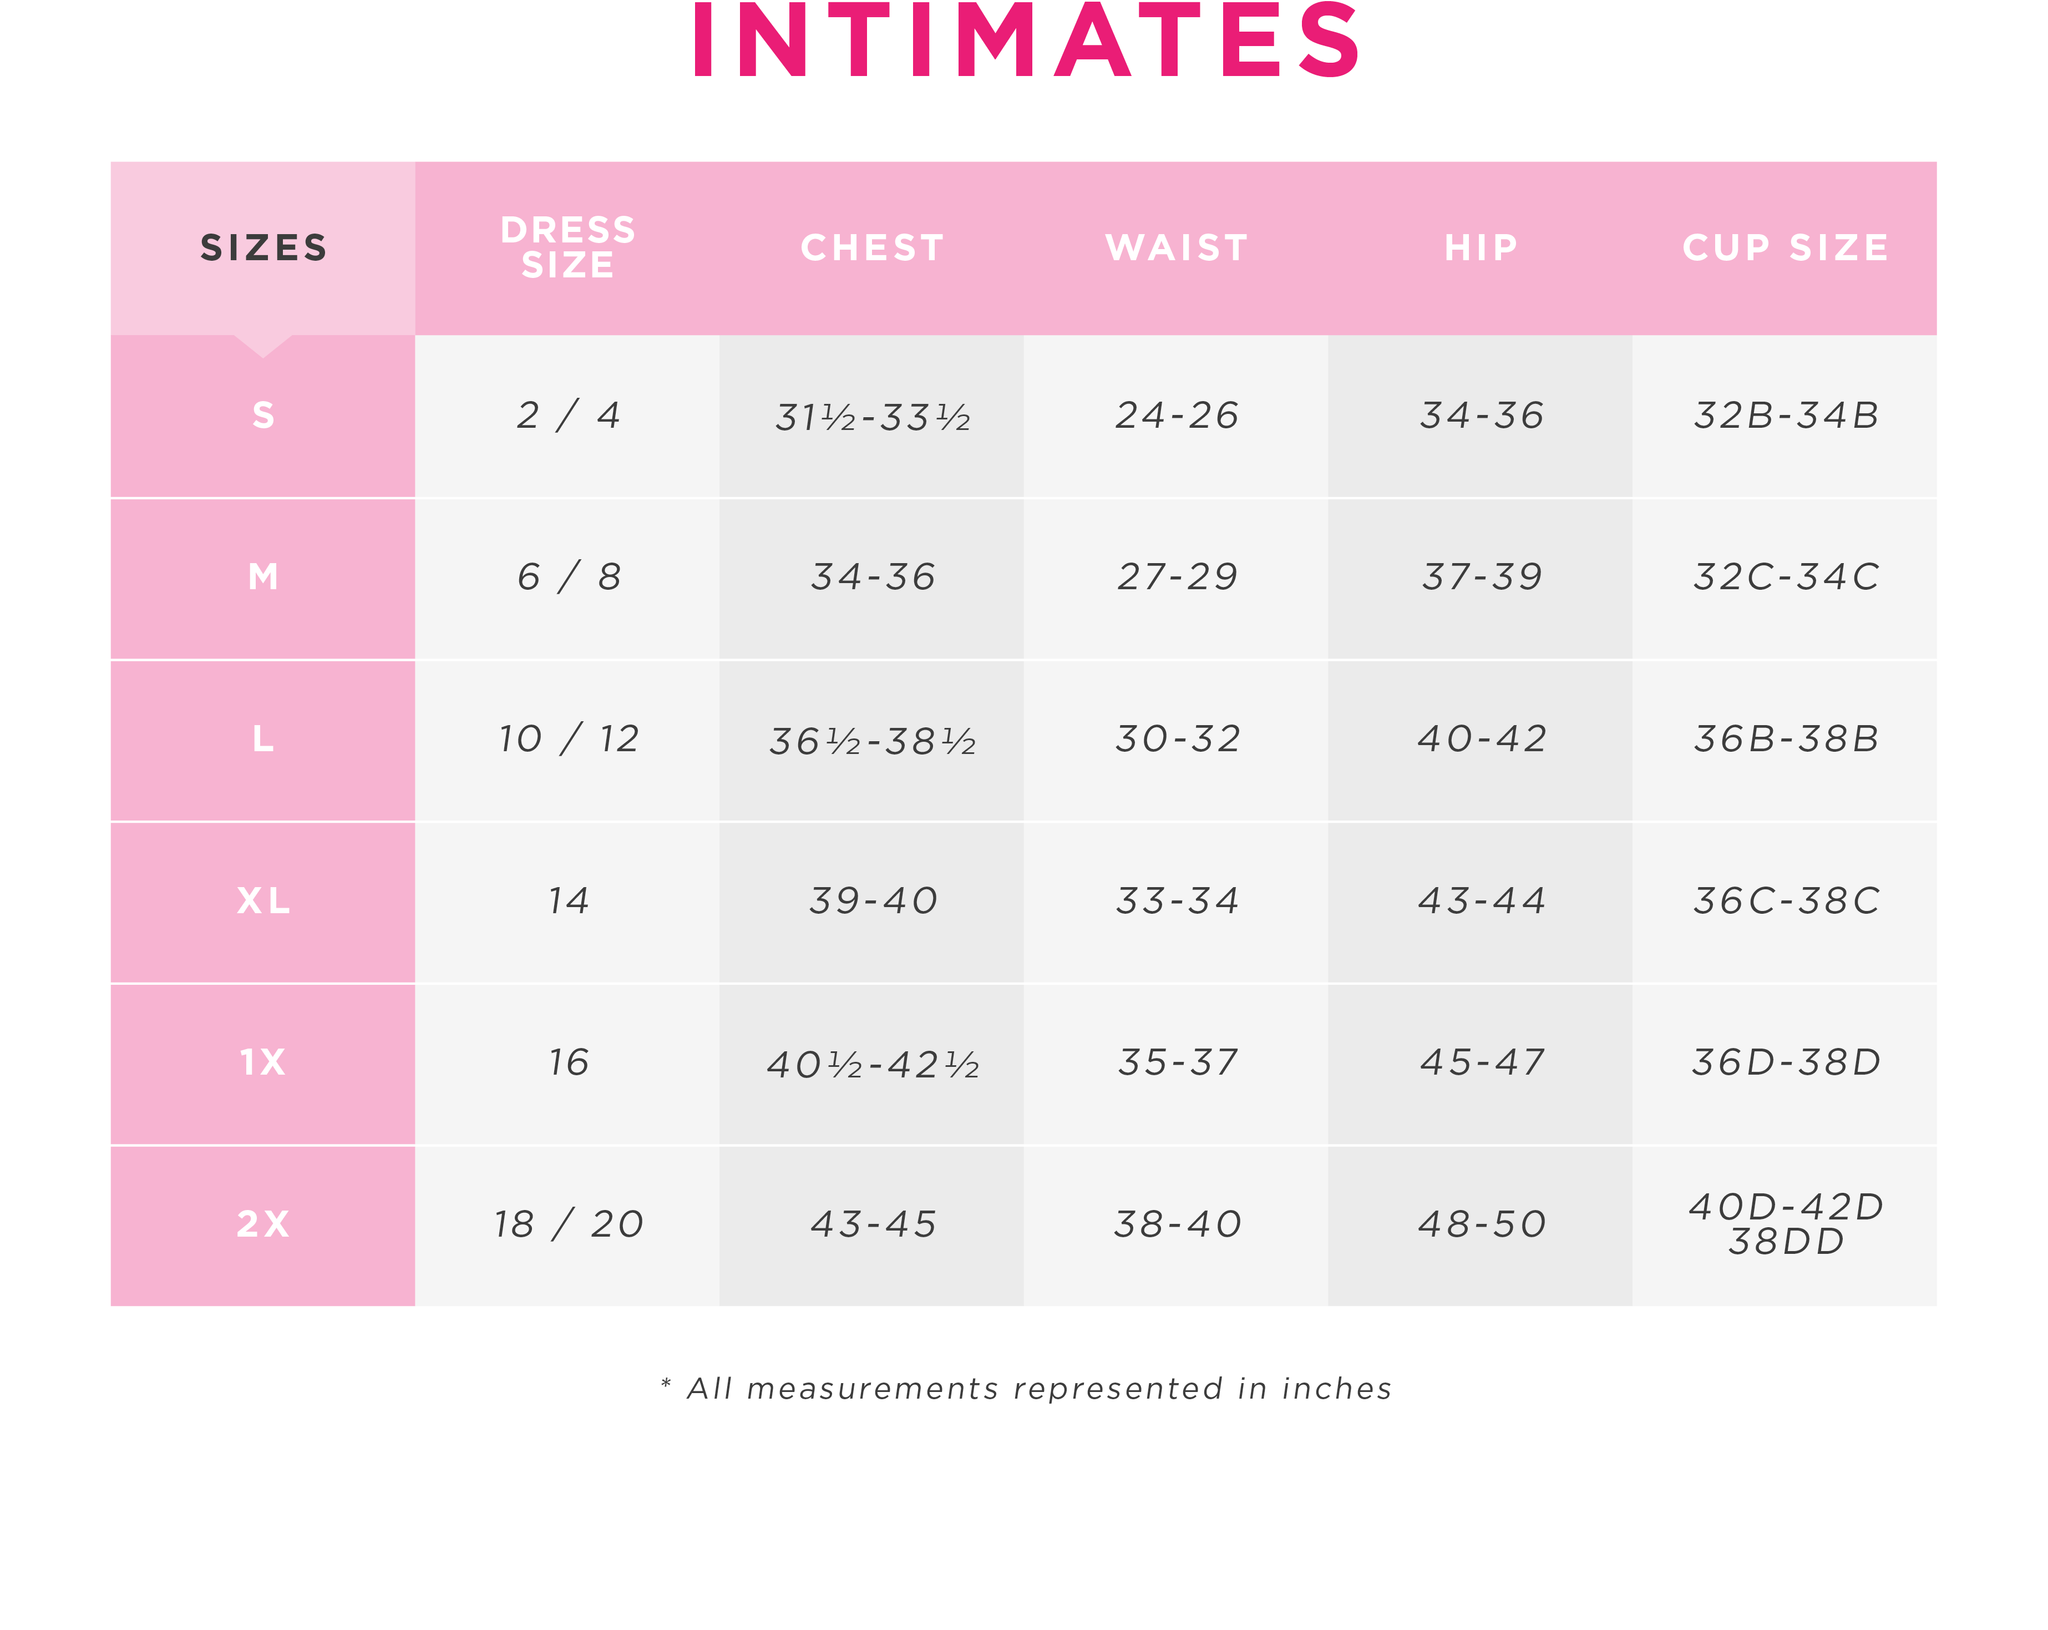 Charlotte Russe - Intimates Size Guide